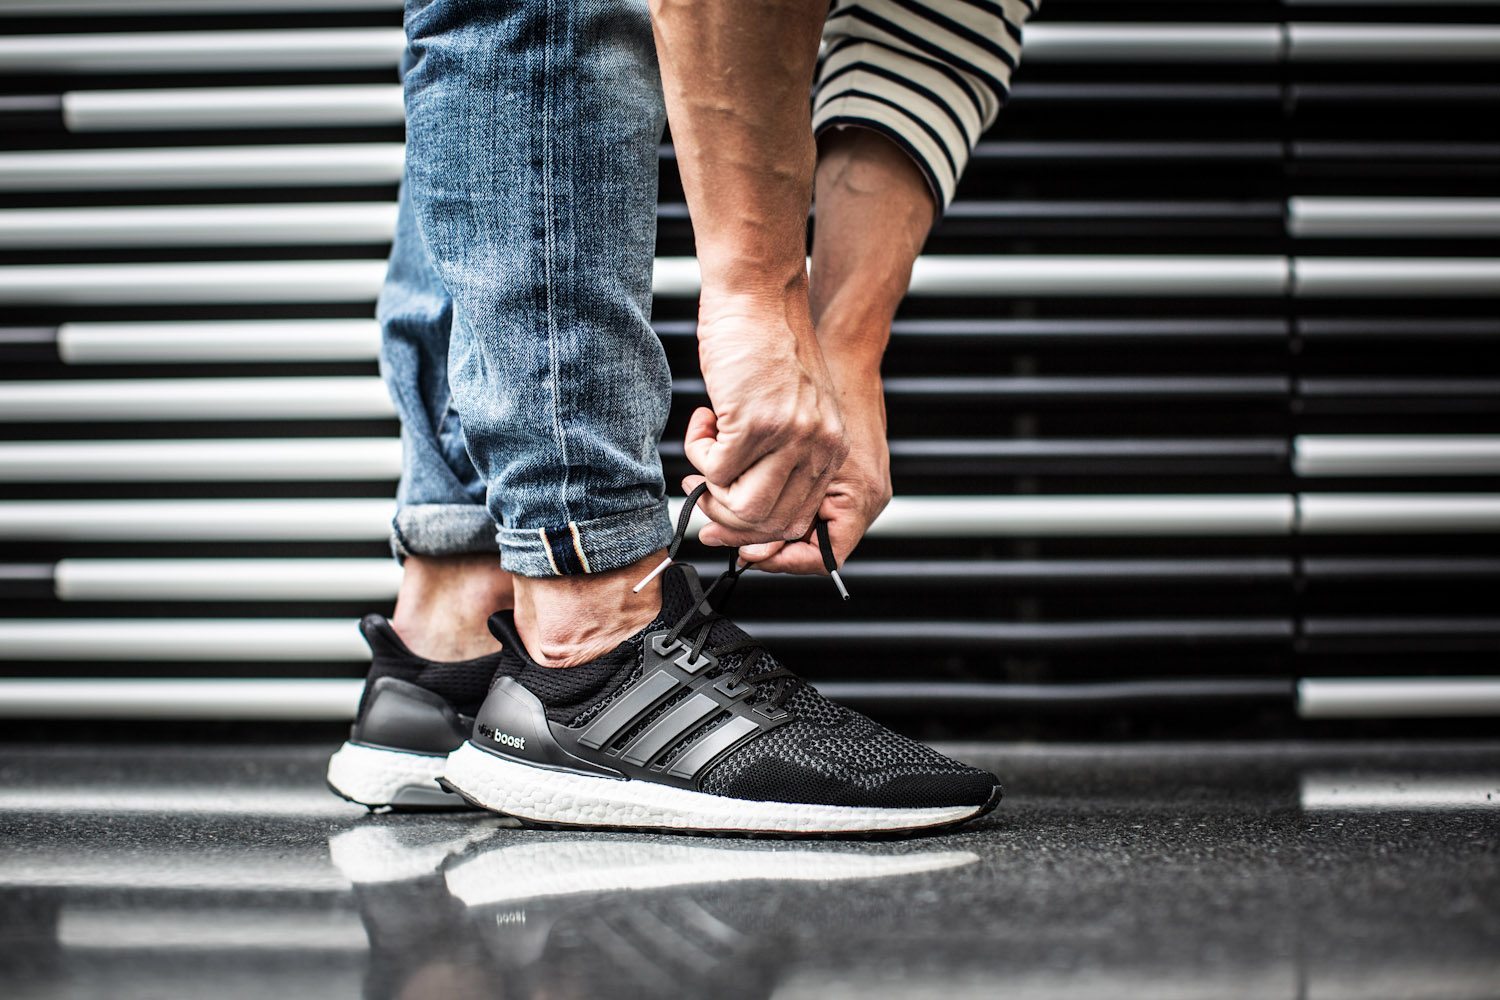 Be Ready for Anything with the Sleek Adidas Ultra Boost Black and White Sneakers